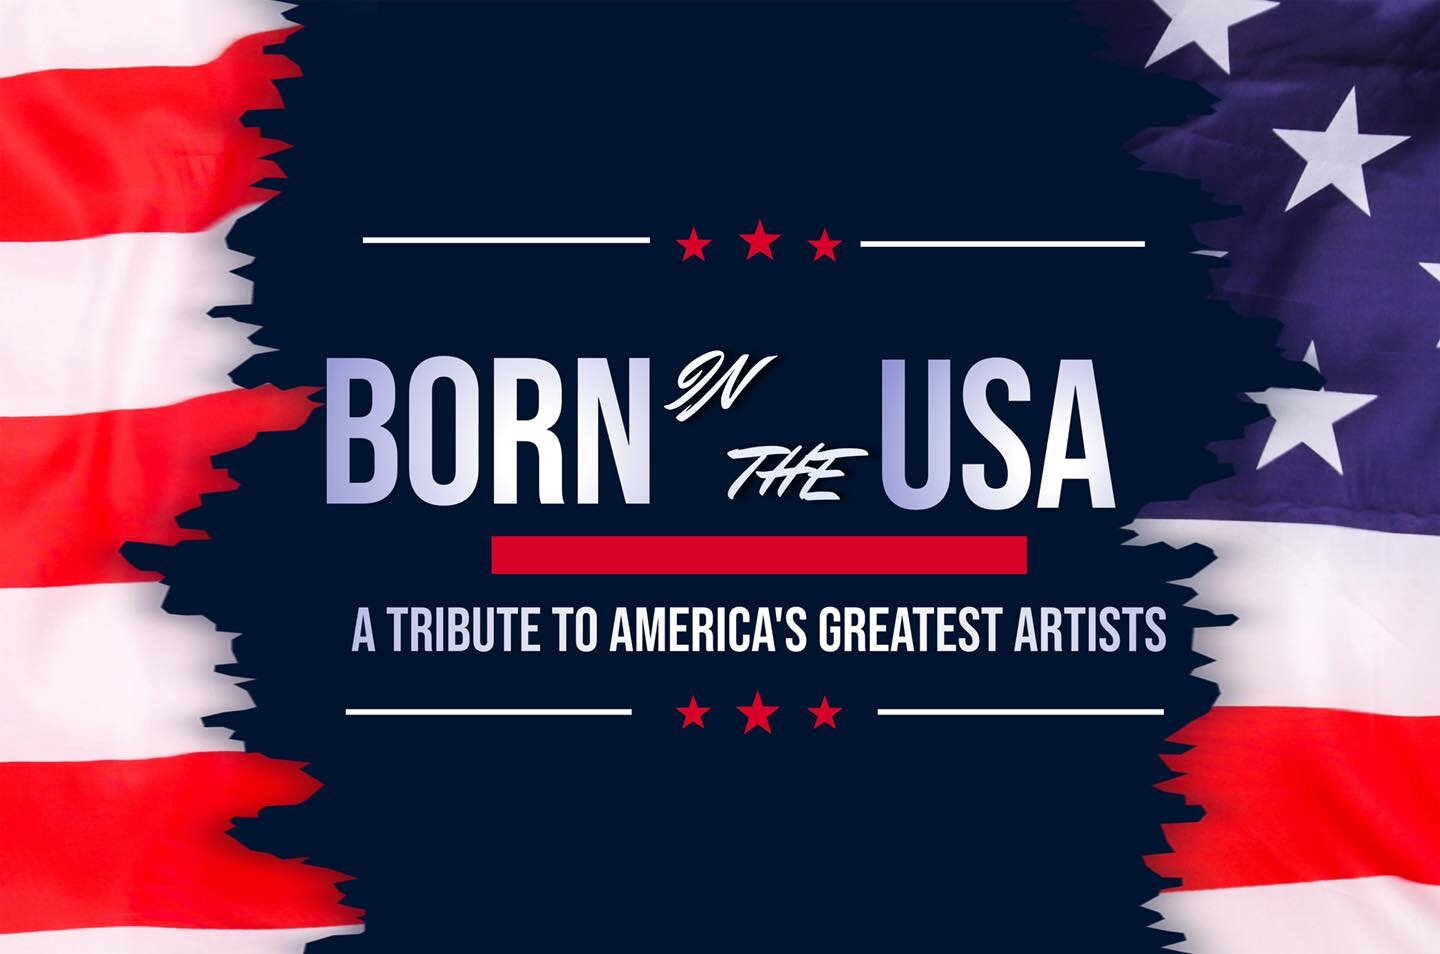 Born in the USA playing this Friday night!!! 🤘